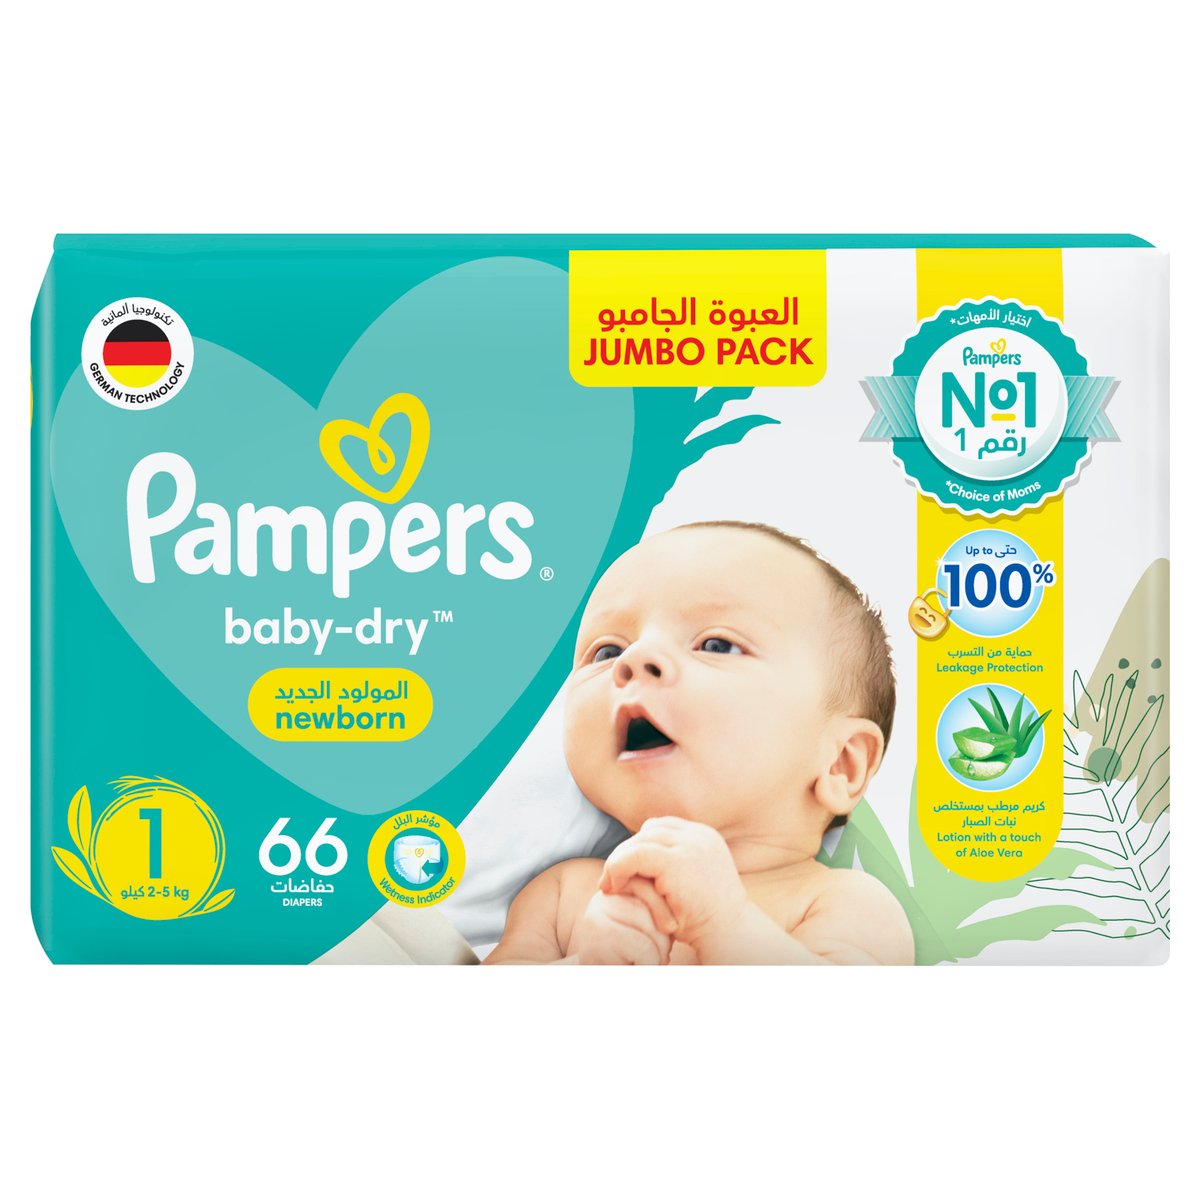 Pampers Baby-Dry Diapers Size 1, Newborn 2-5kg 66pcs